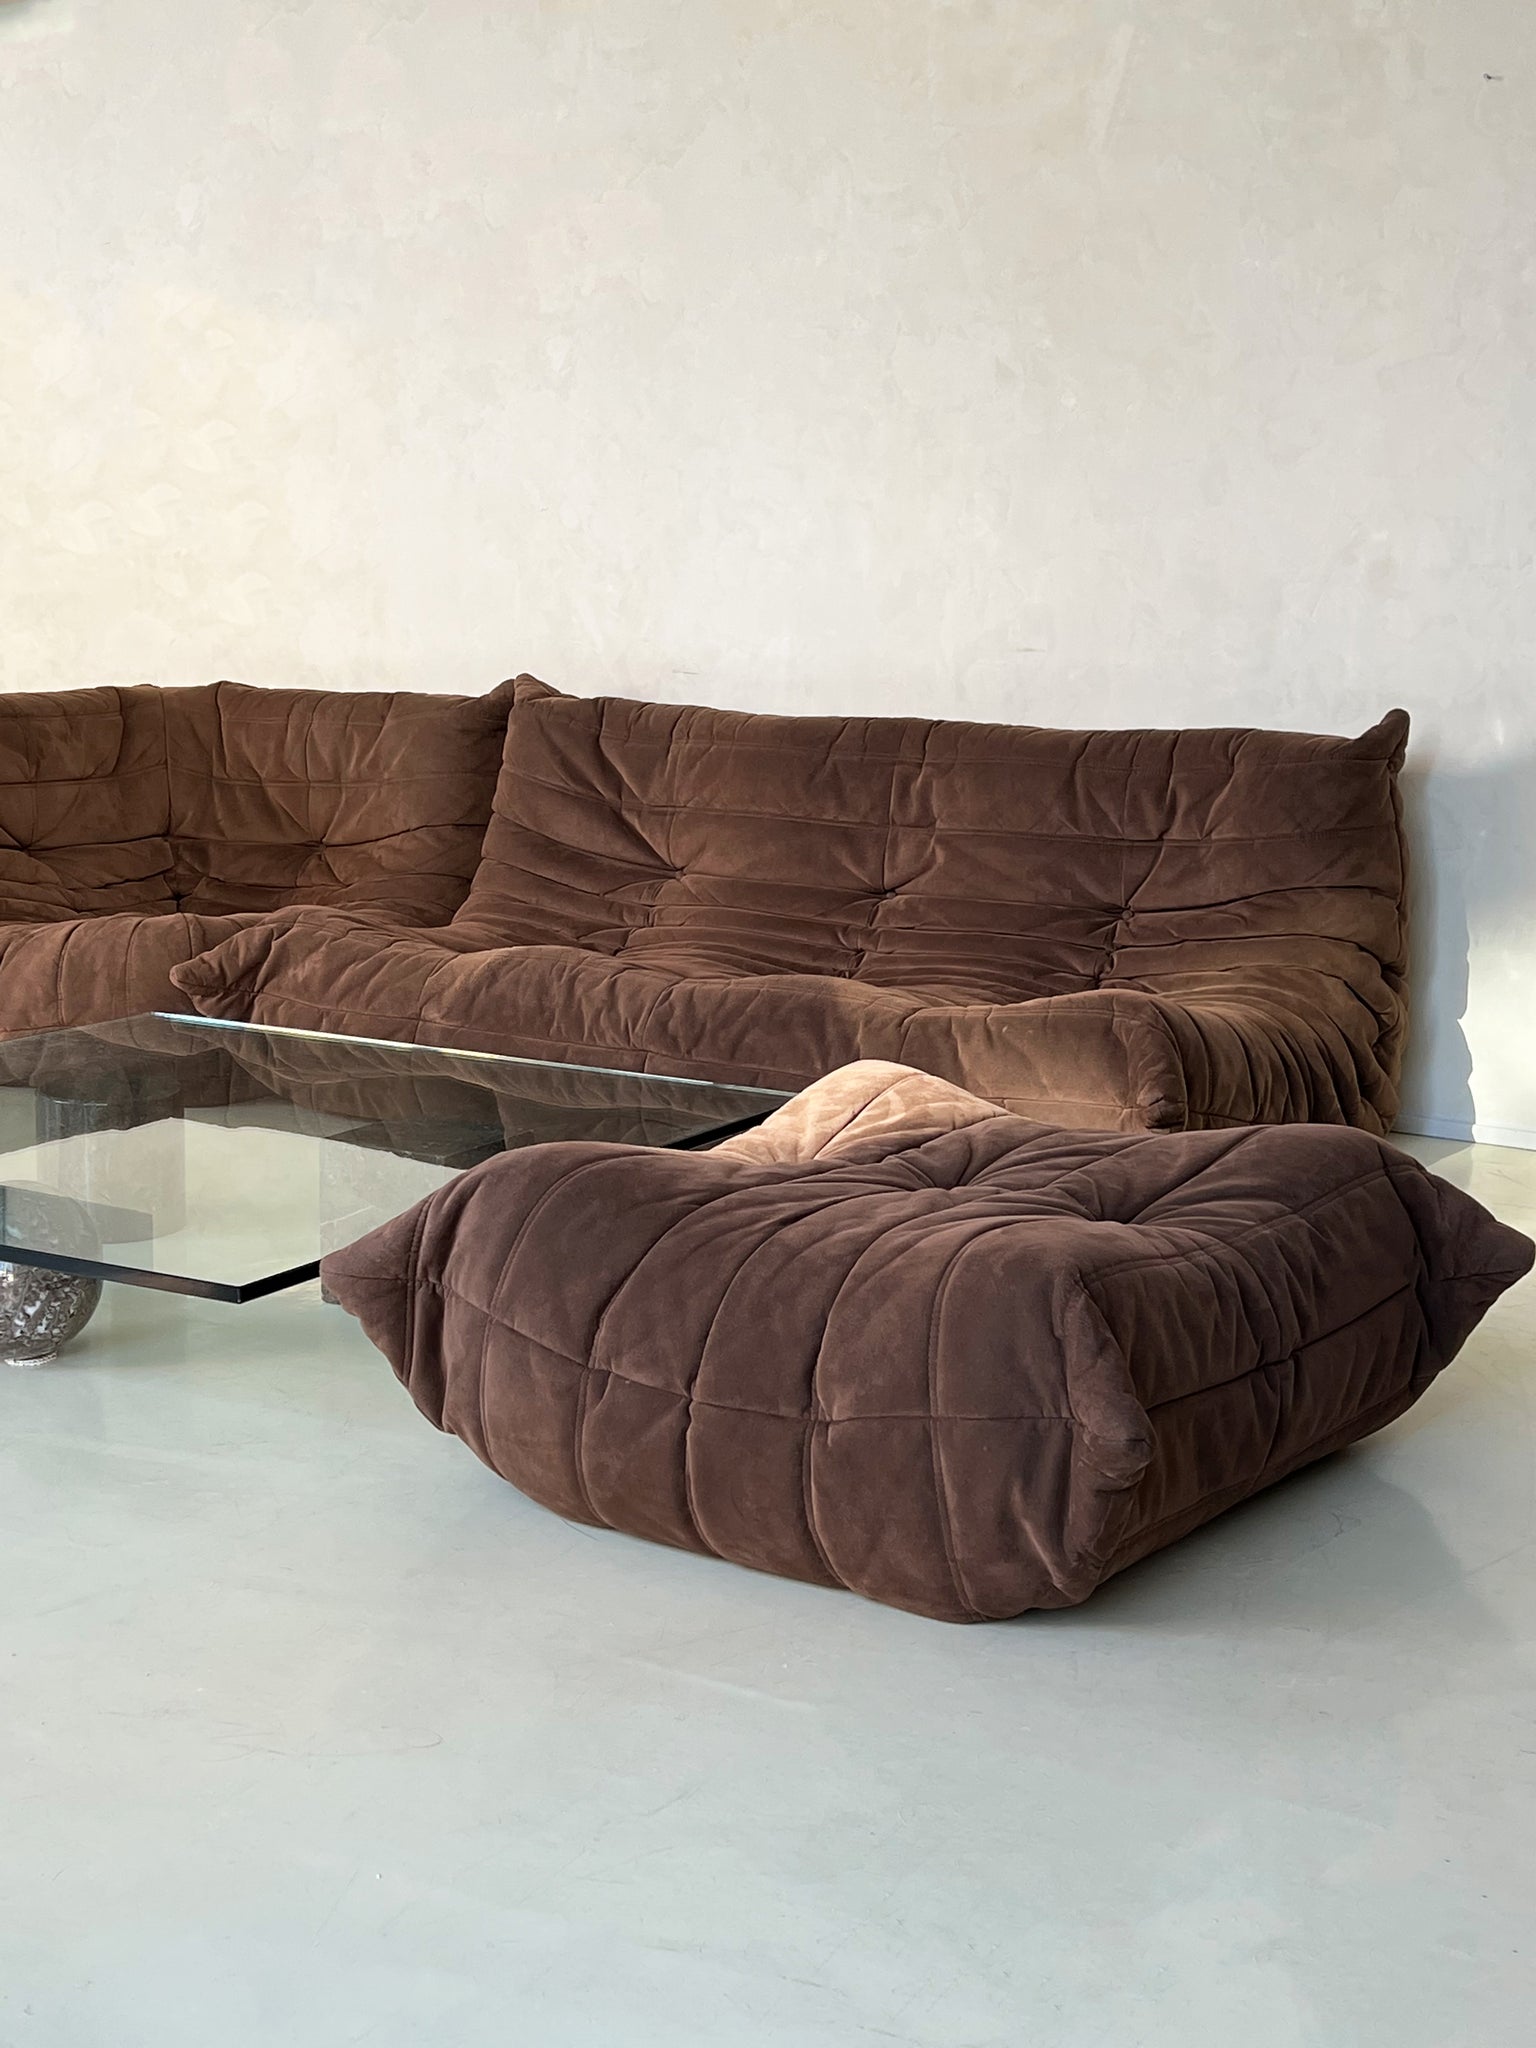 Togo Modular Sofa in Brown Leather by Michel Ducaroy for Ligne